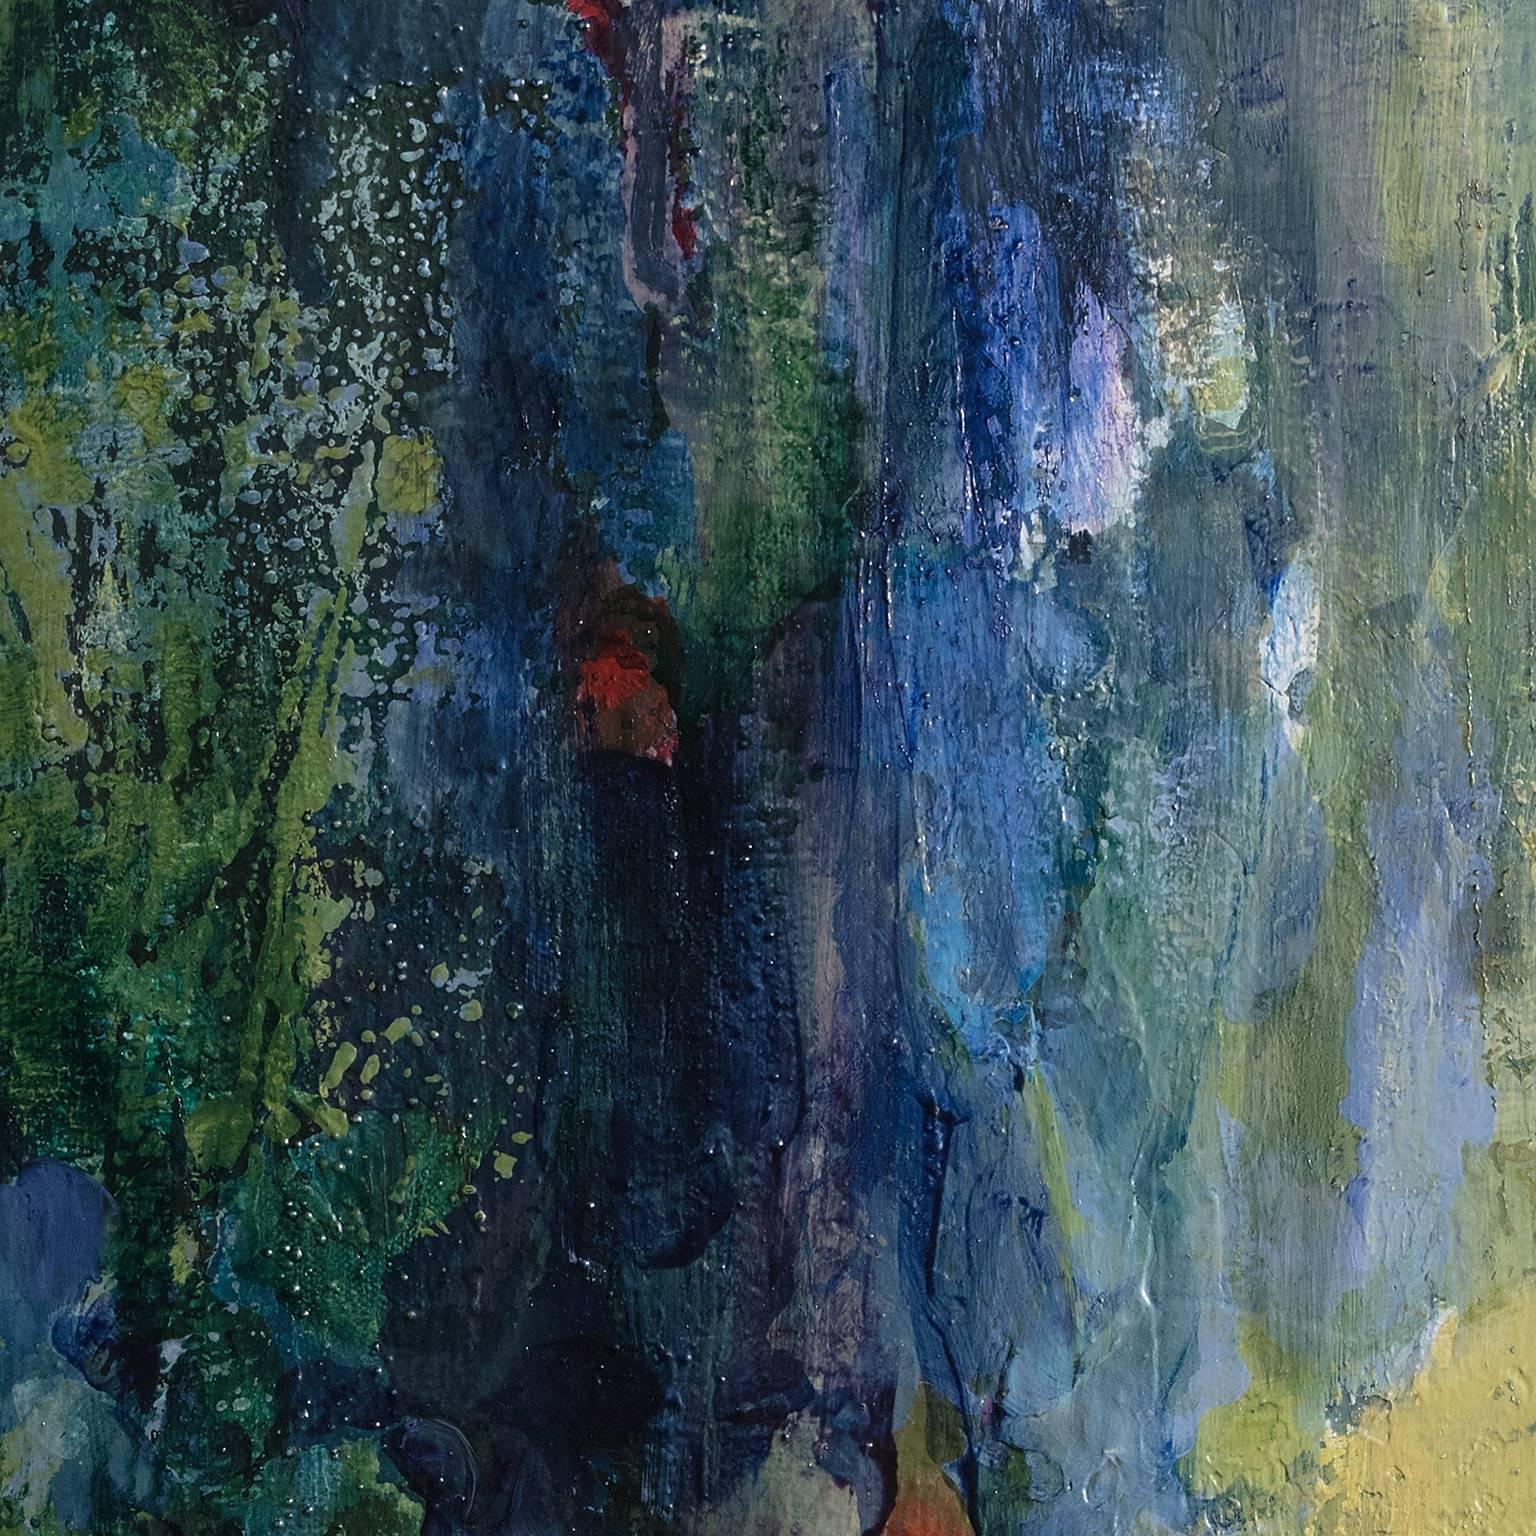 Petrov's fascination for color and light is the founding element for this intensely emotional vertical painting. The sensuality of the deep dark blue and green impasto is so strongly and yet delicately counterbalanced by the luminosity of the light